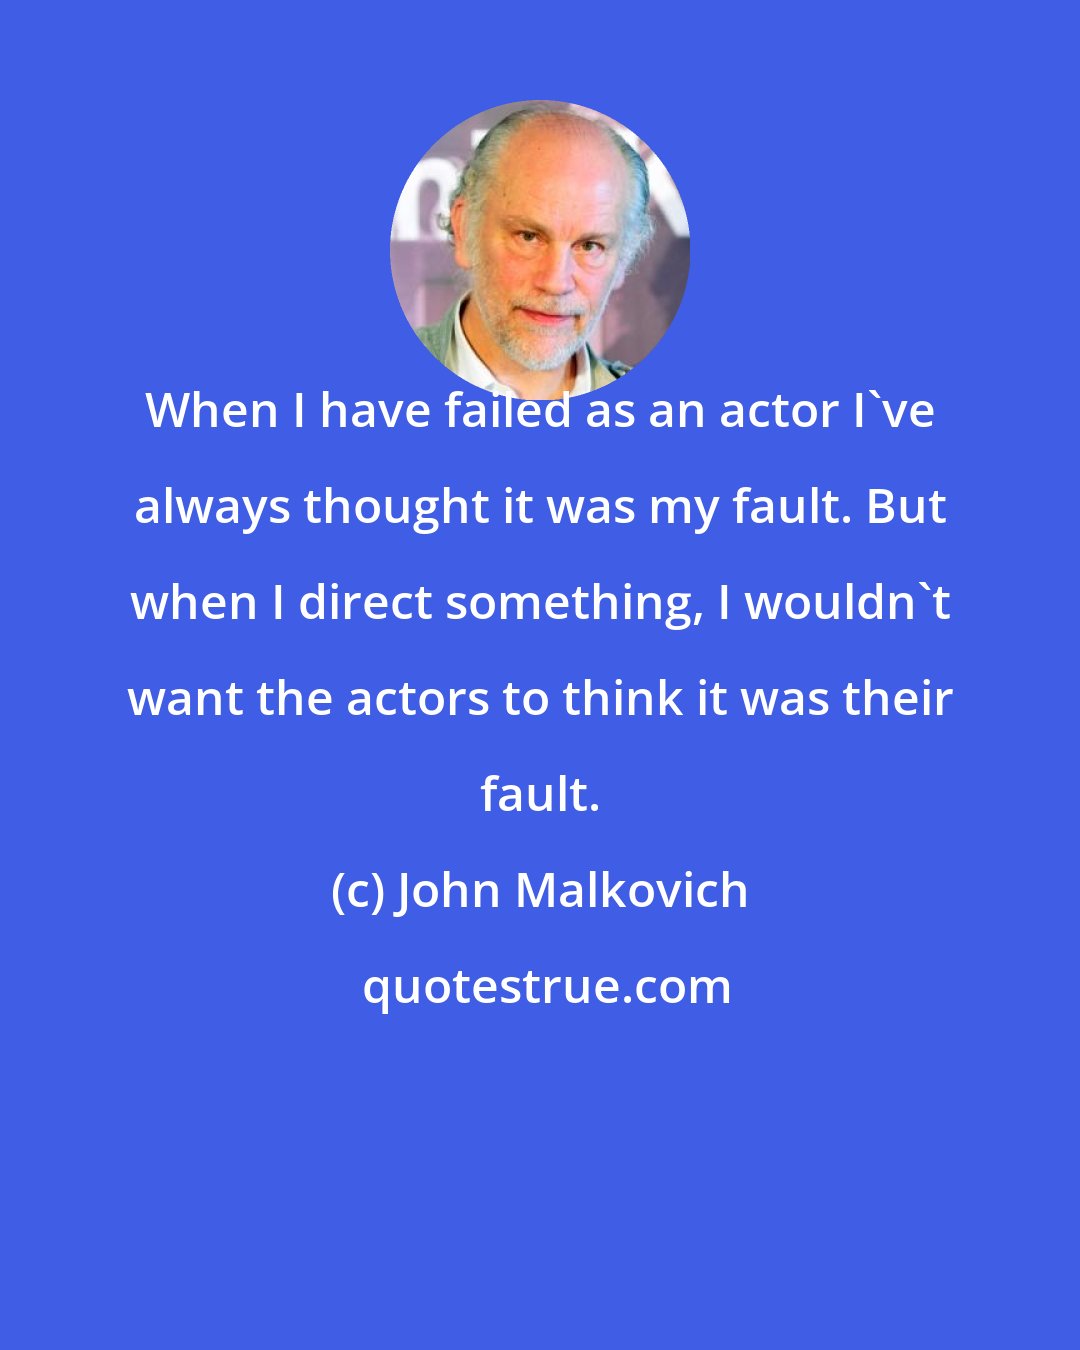 John Malkovich: When I have failed as an actor I've always thought it was my fault. But when I direct something, I wouldn't want the actors to think it was their fault.